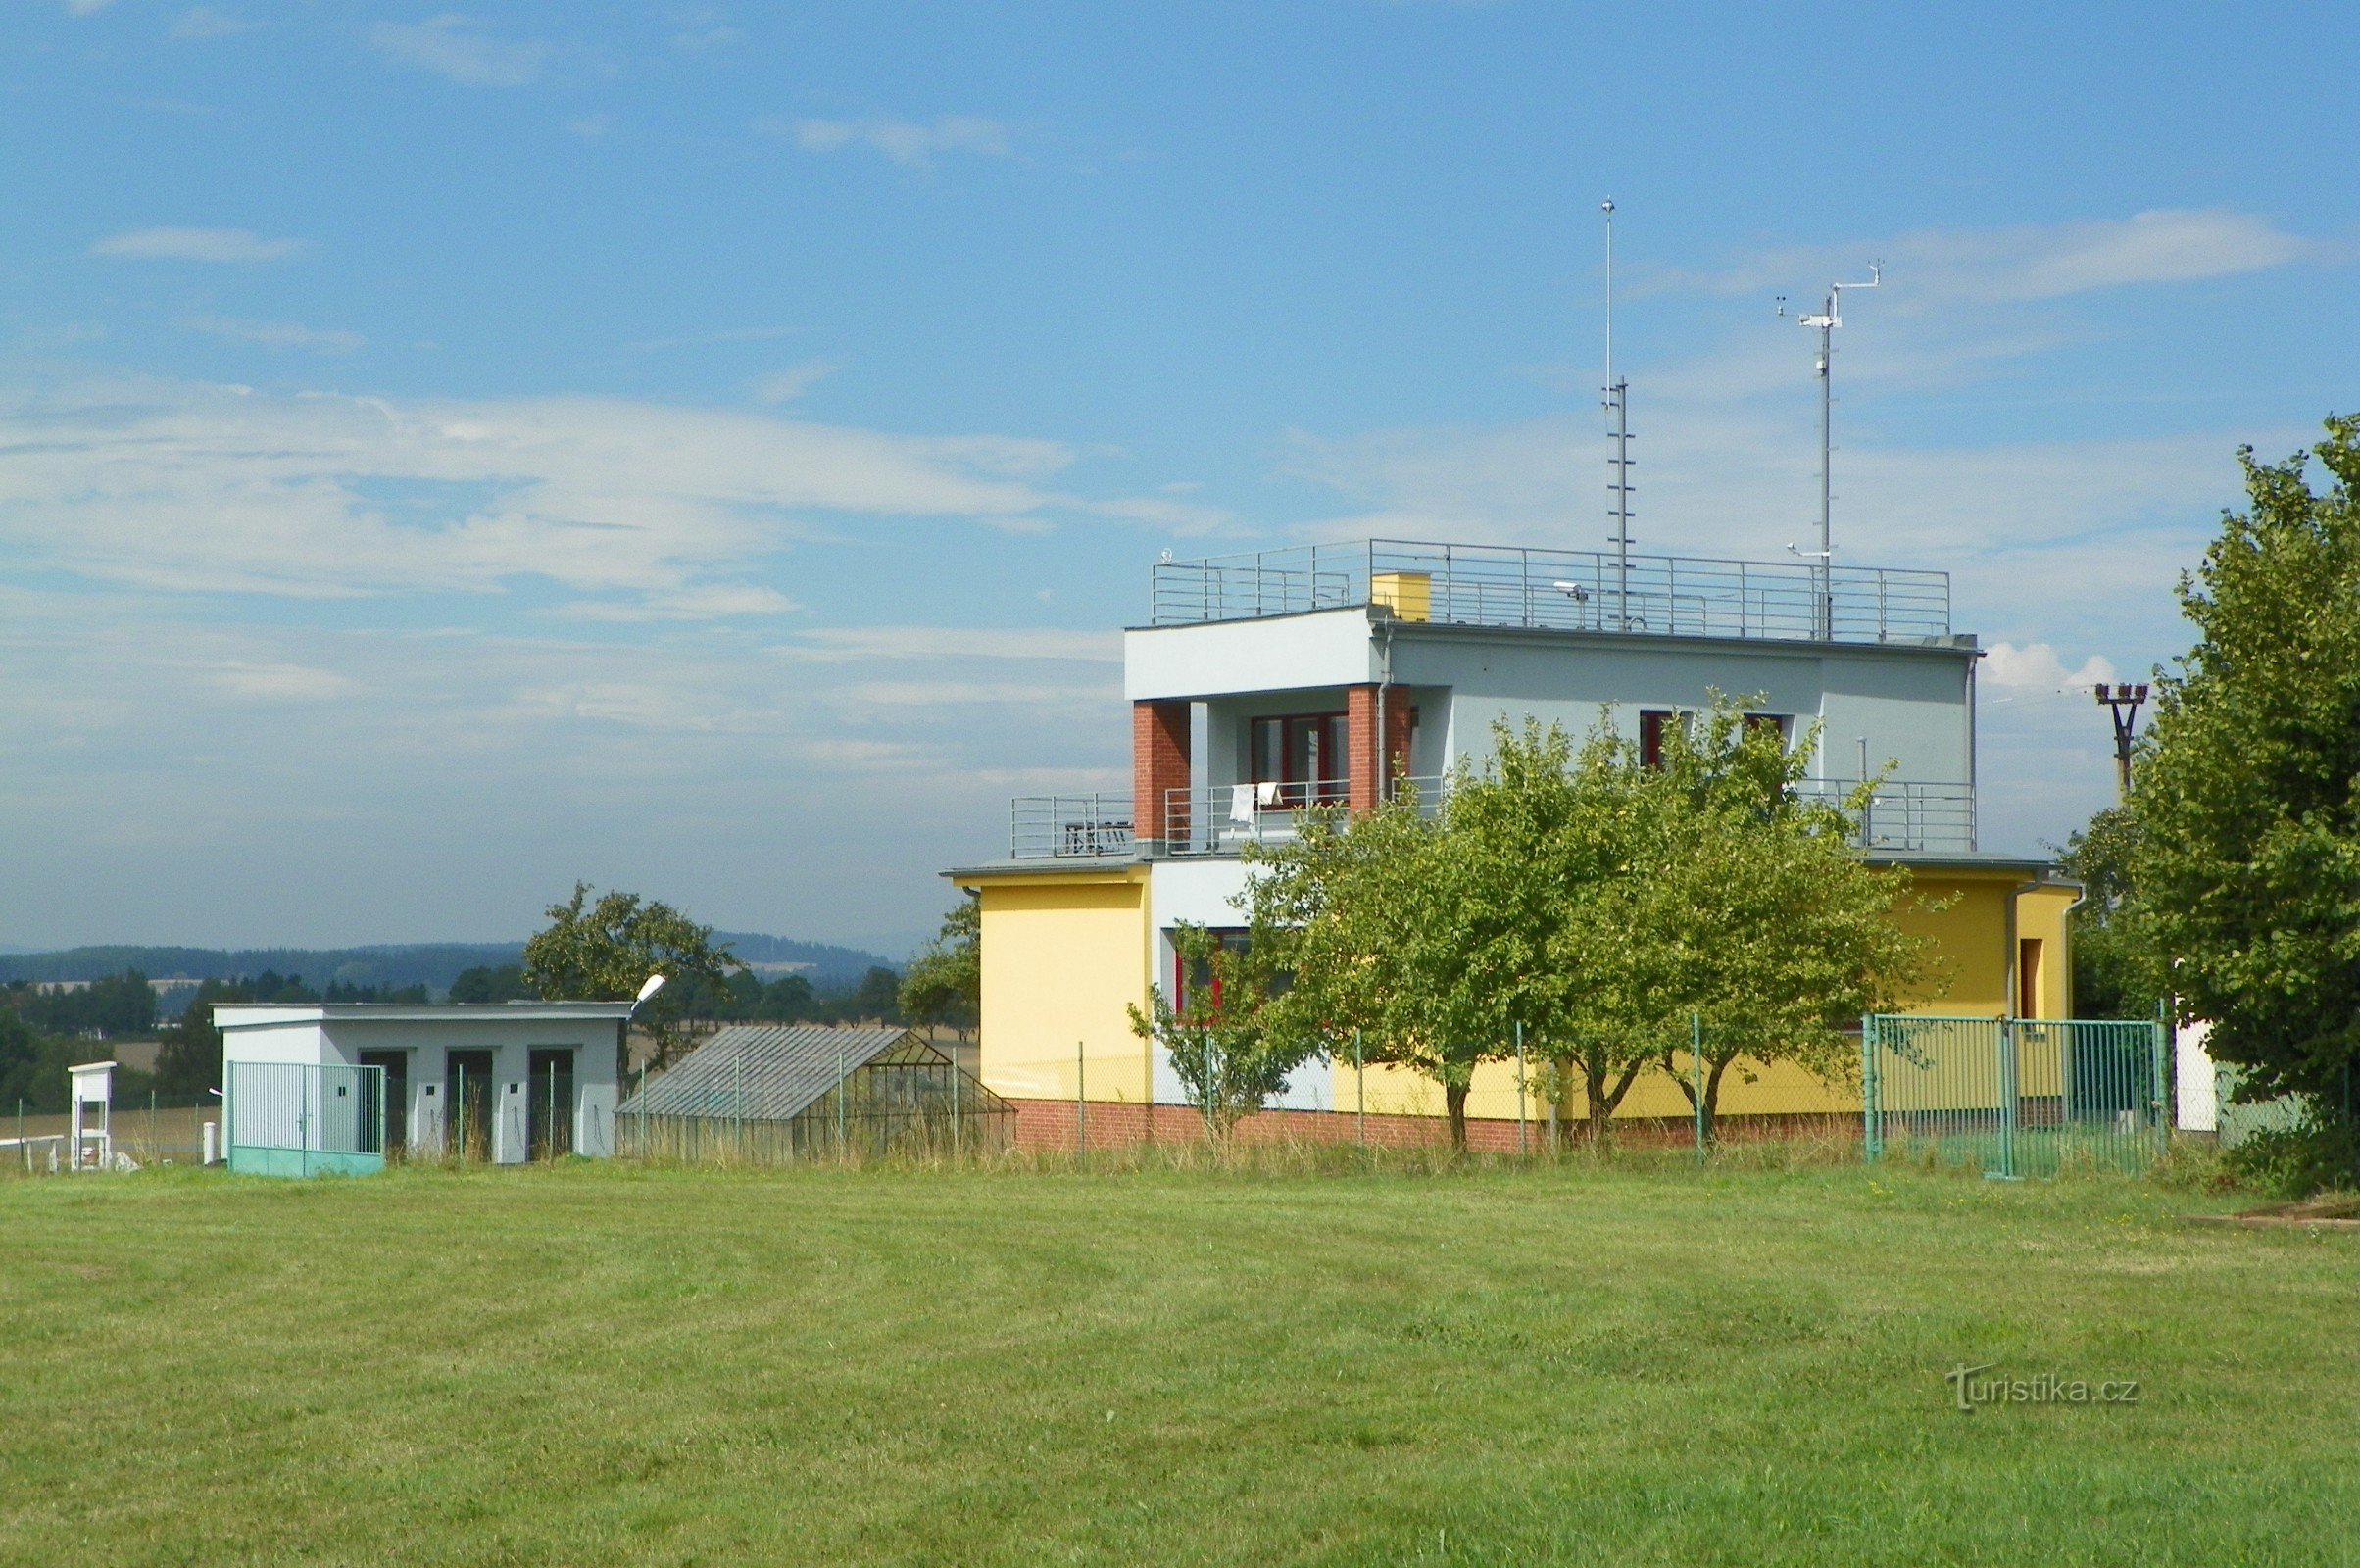 The tower at Přibyslav airport with a webcam